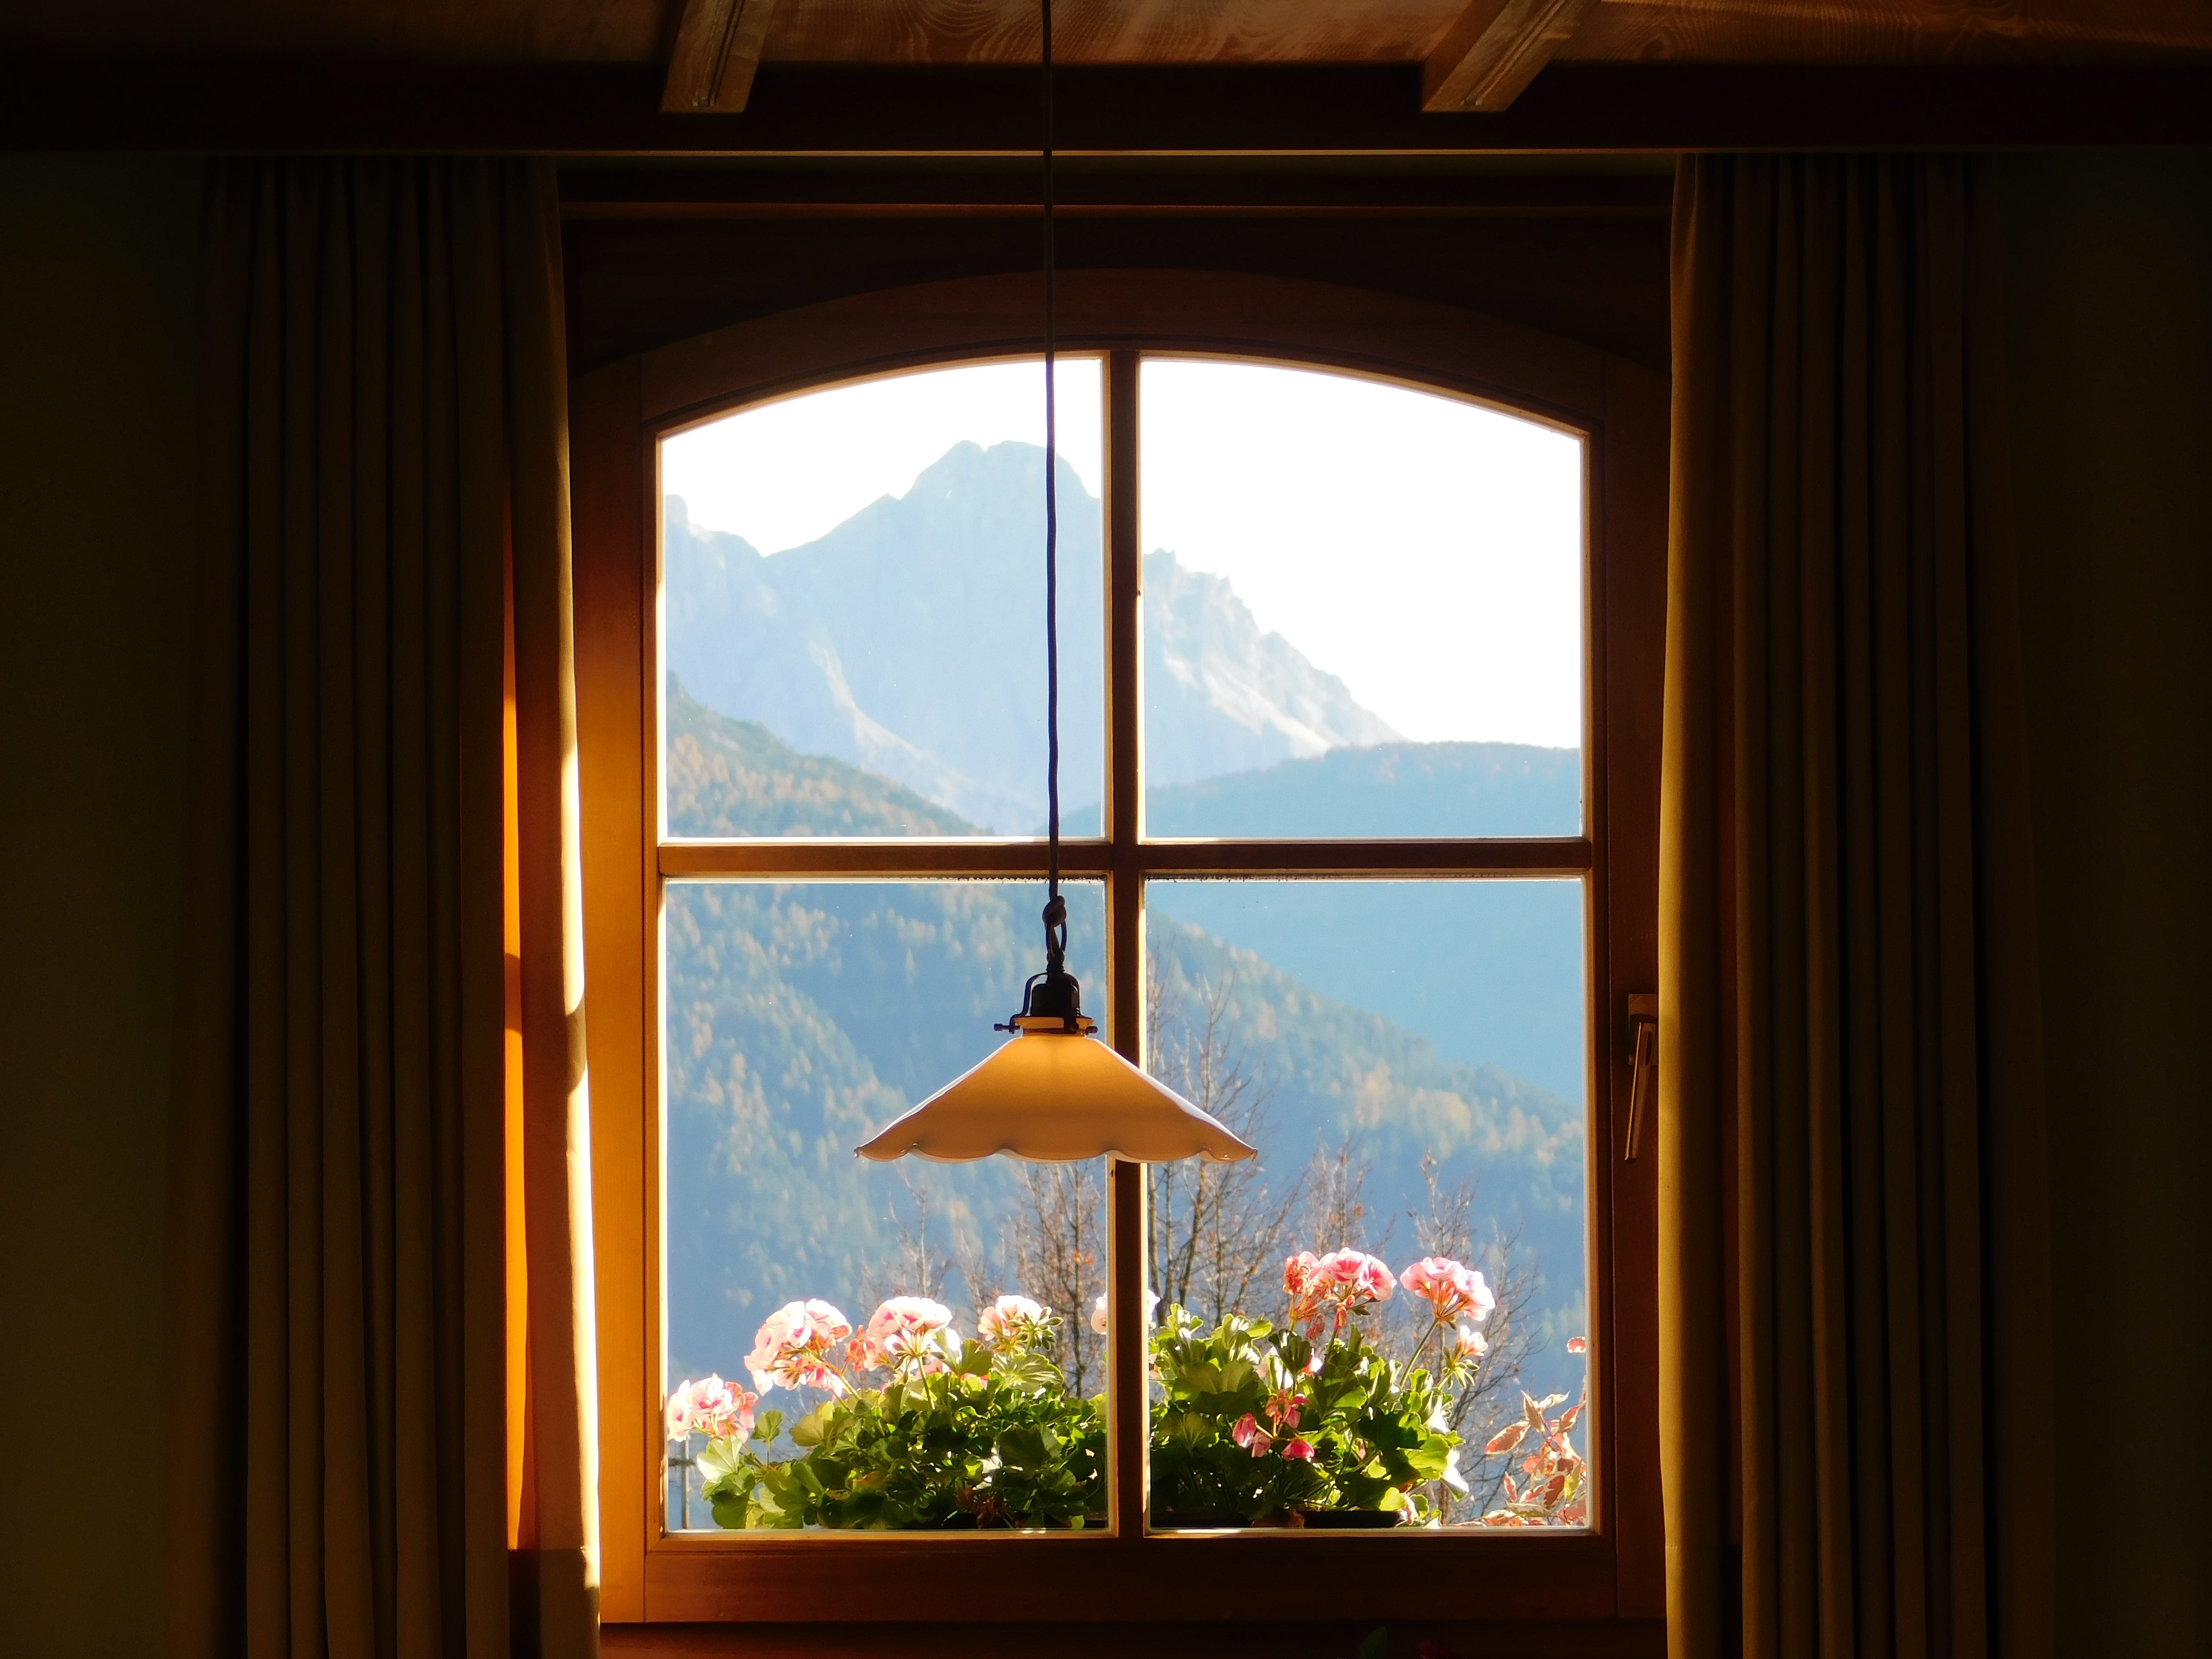 Looking through a home window with a lamp inside and flowers and a mountain outside.